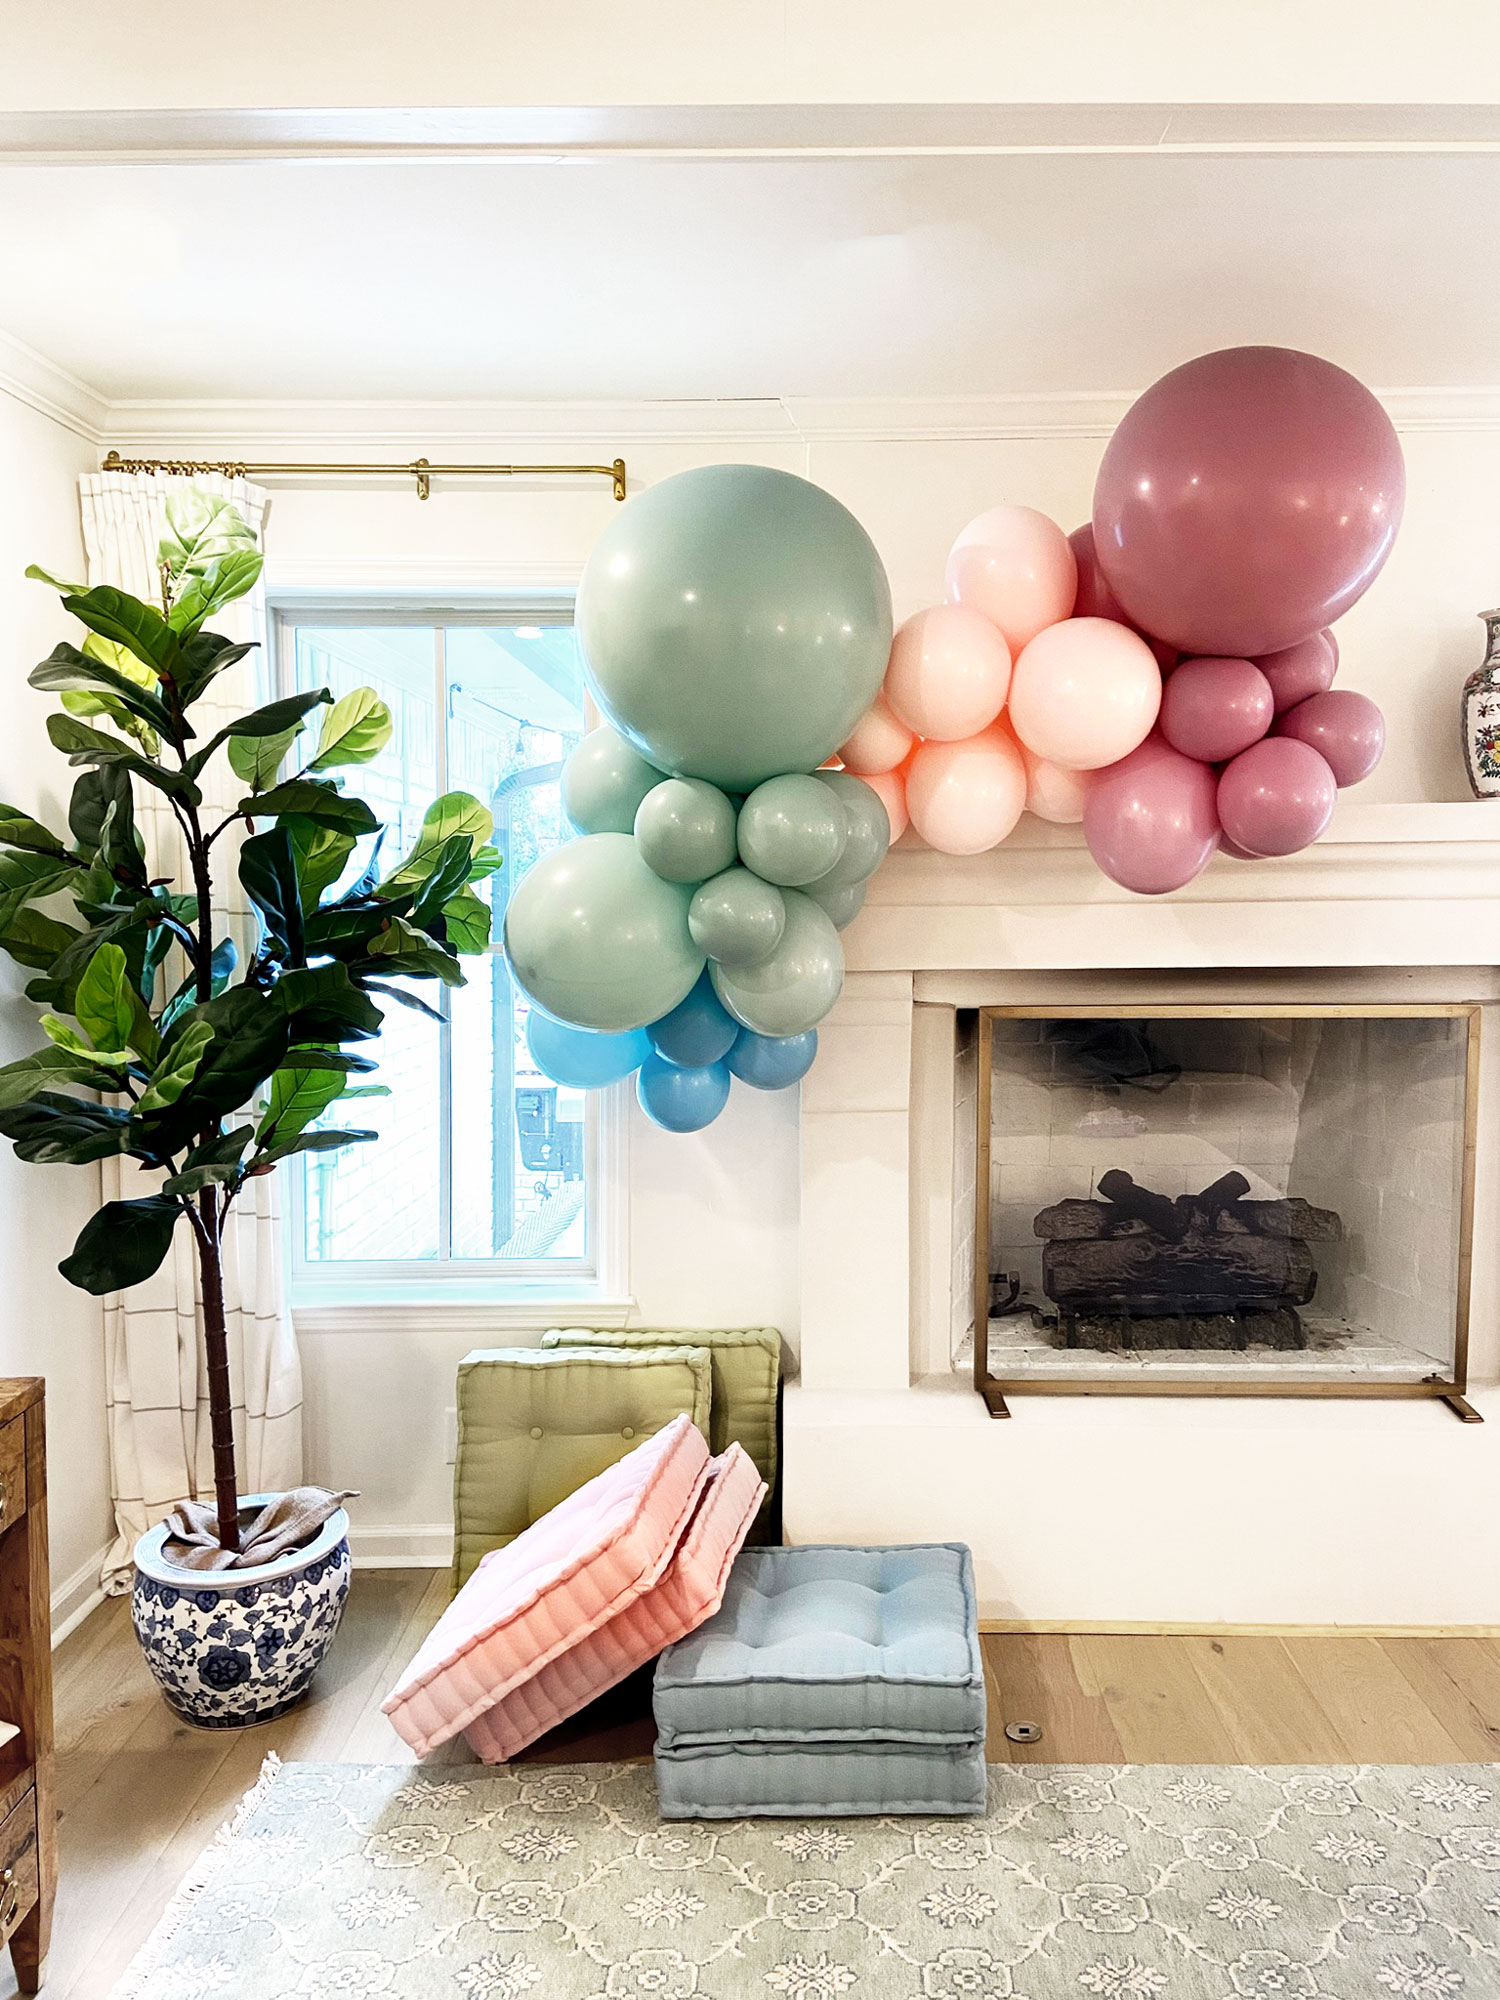 Top 10 fireplace balloon decor ideas and inspiration